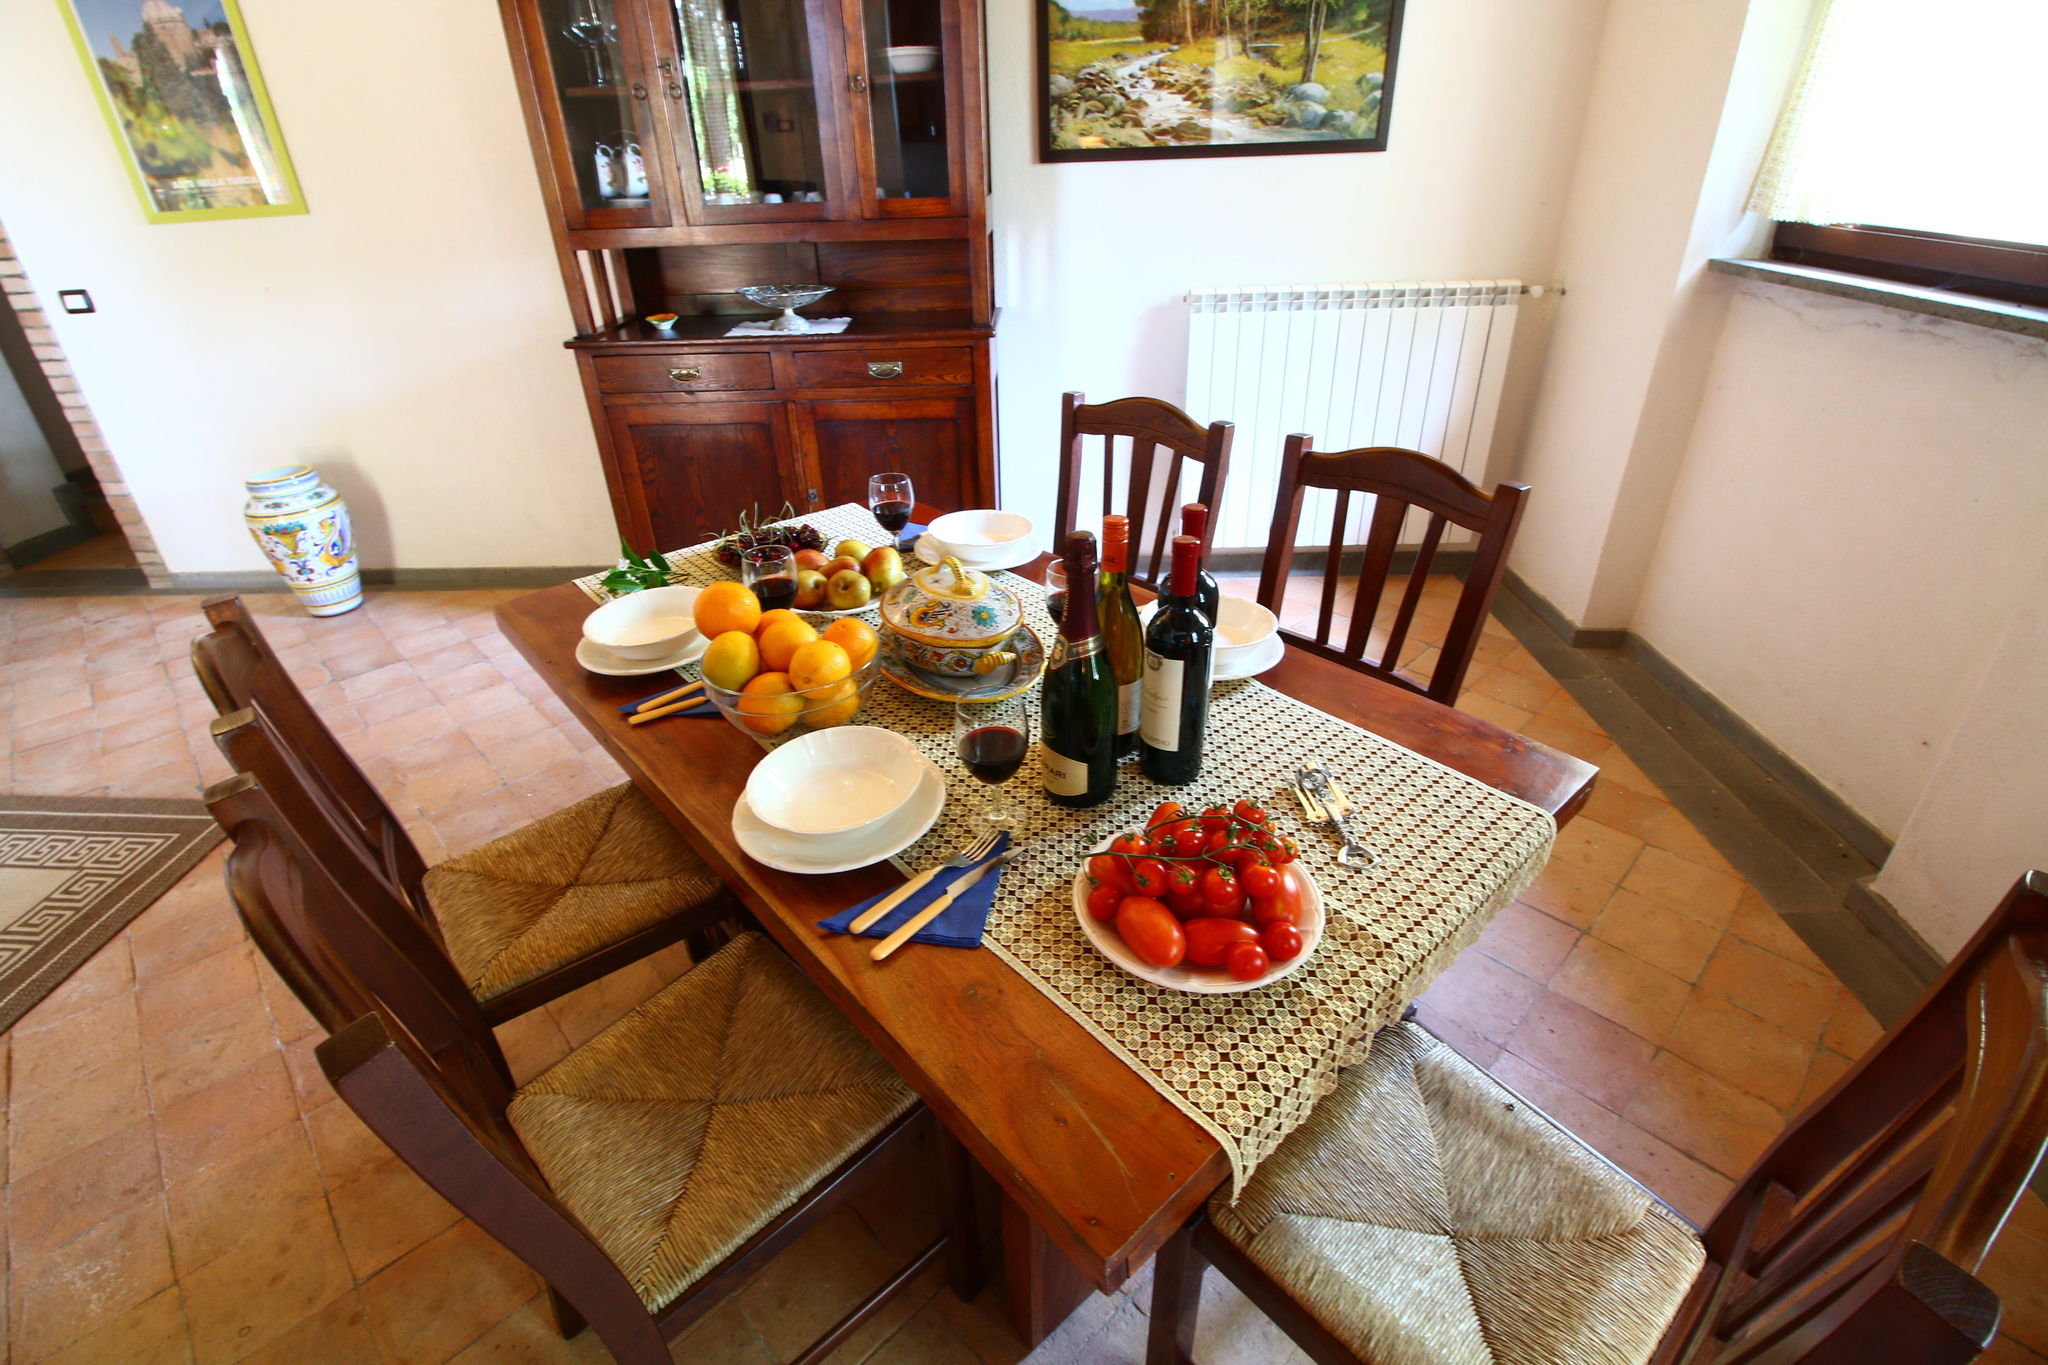 Holiday home in the countryside ideal for groups of 12-18 guests